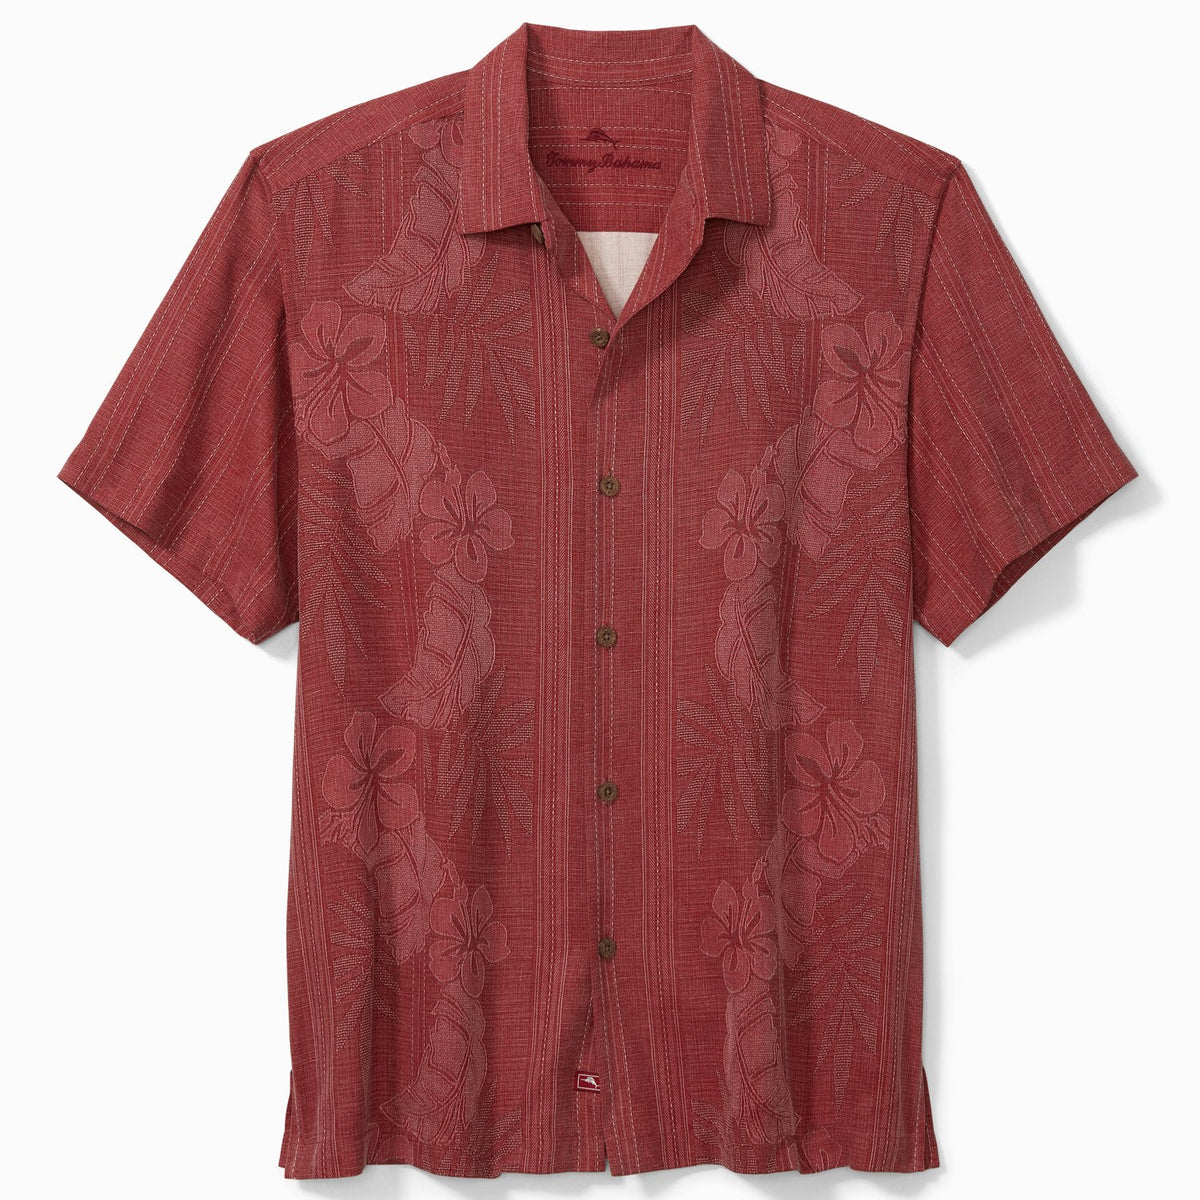 Tommy Bahama 'Caught Red Handed' Short Sleeve T-Shirt